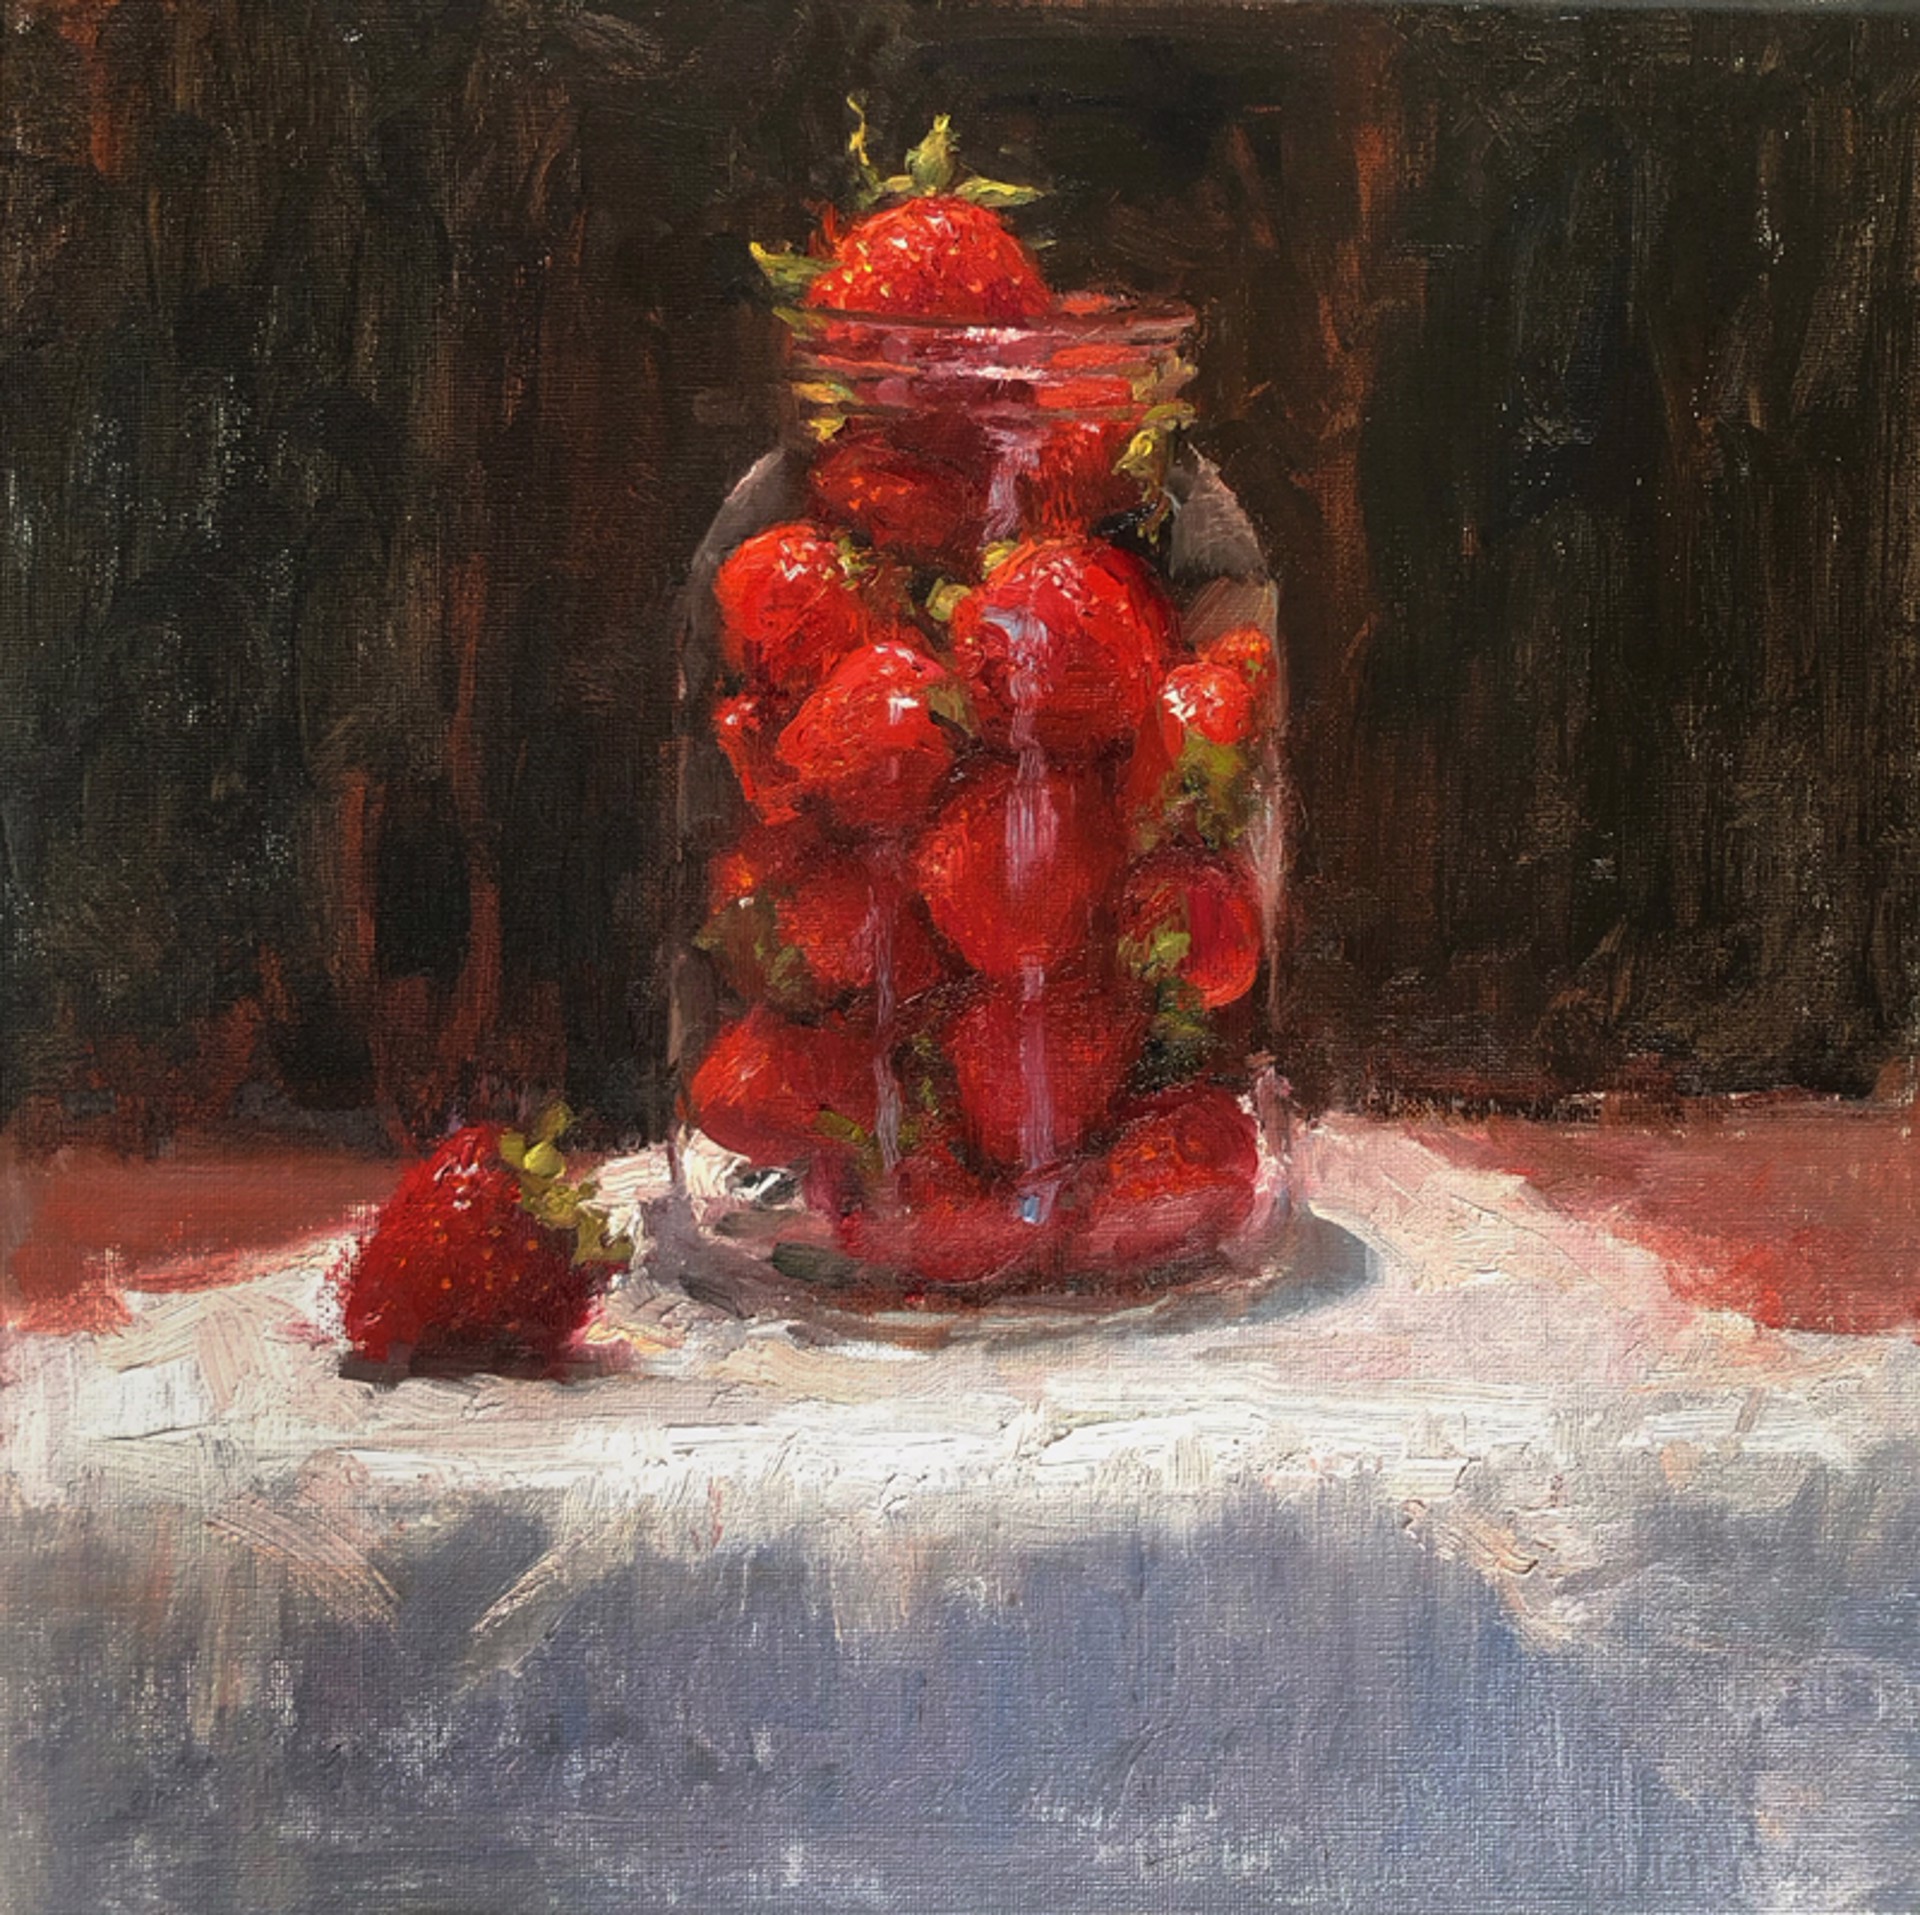 Quart of Berries by Sue Foell, opa